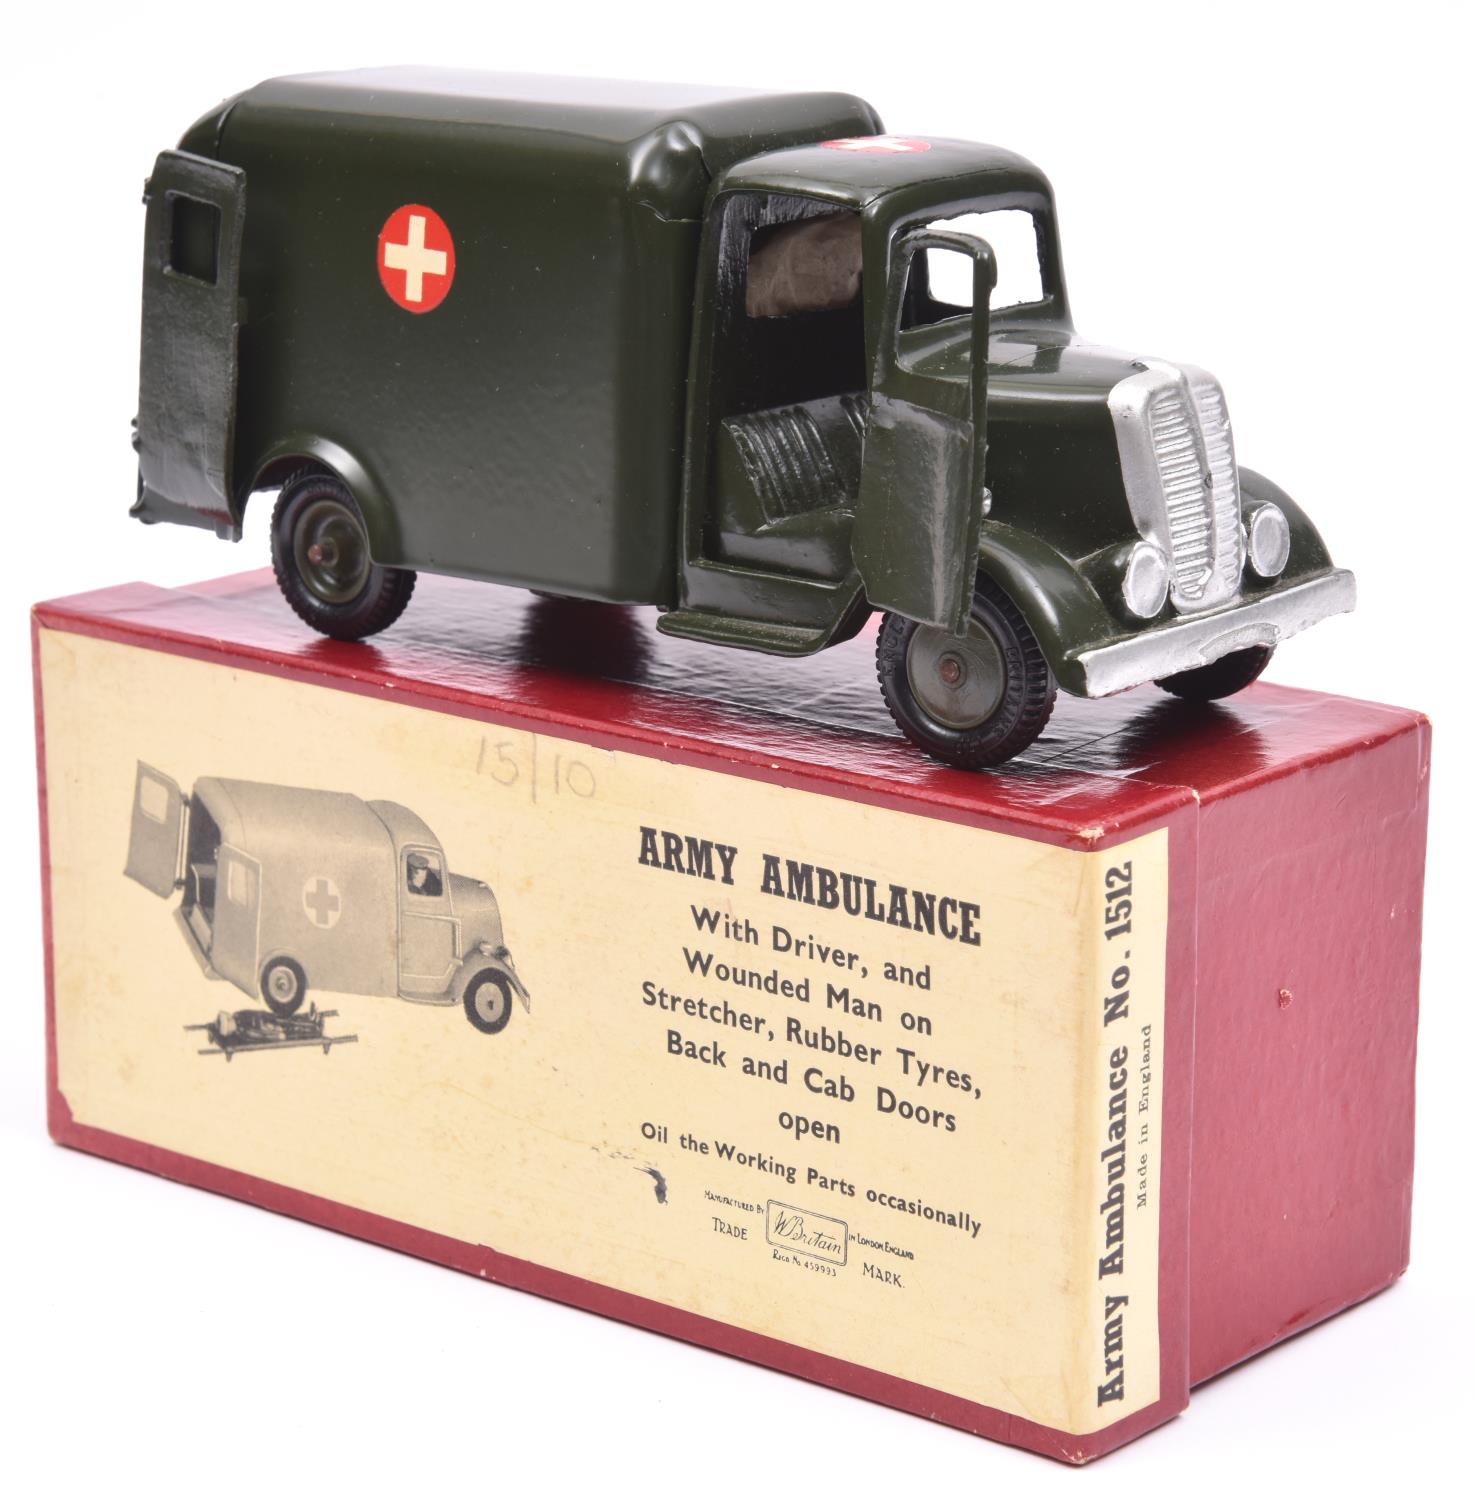 A Britains Army Ambulance with driver and wounded man on stretcher. No.1512. Vehicle in gloss